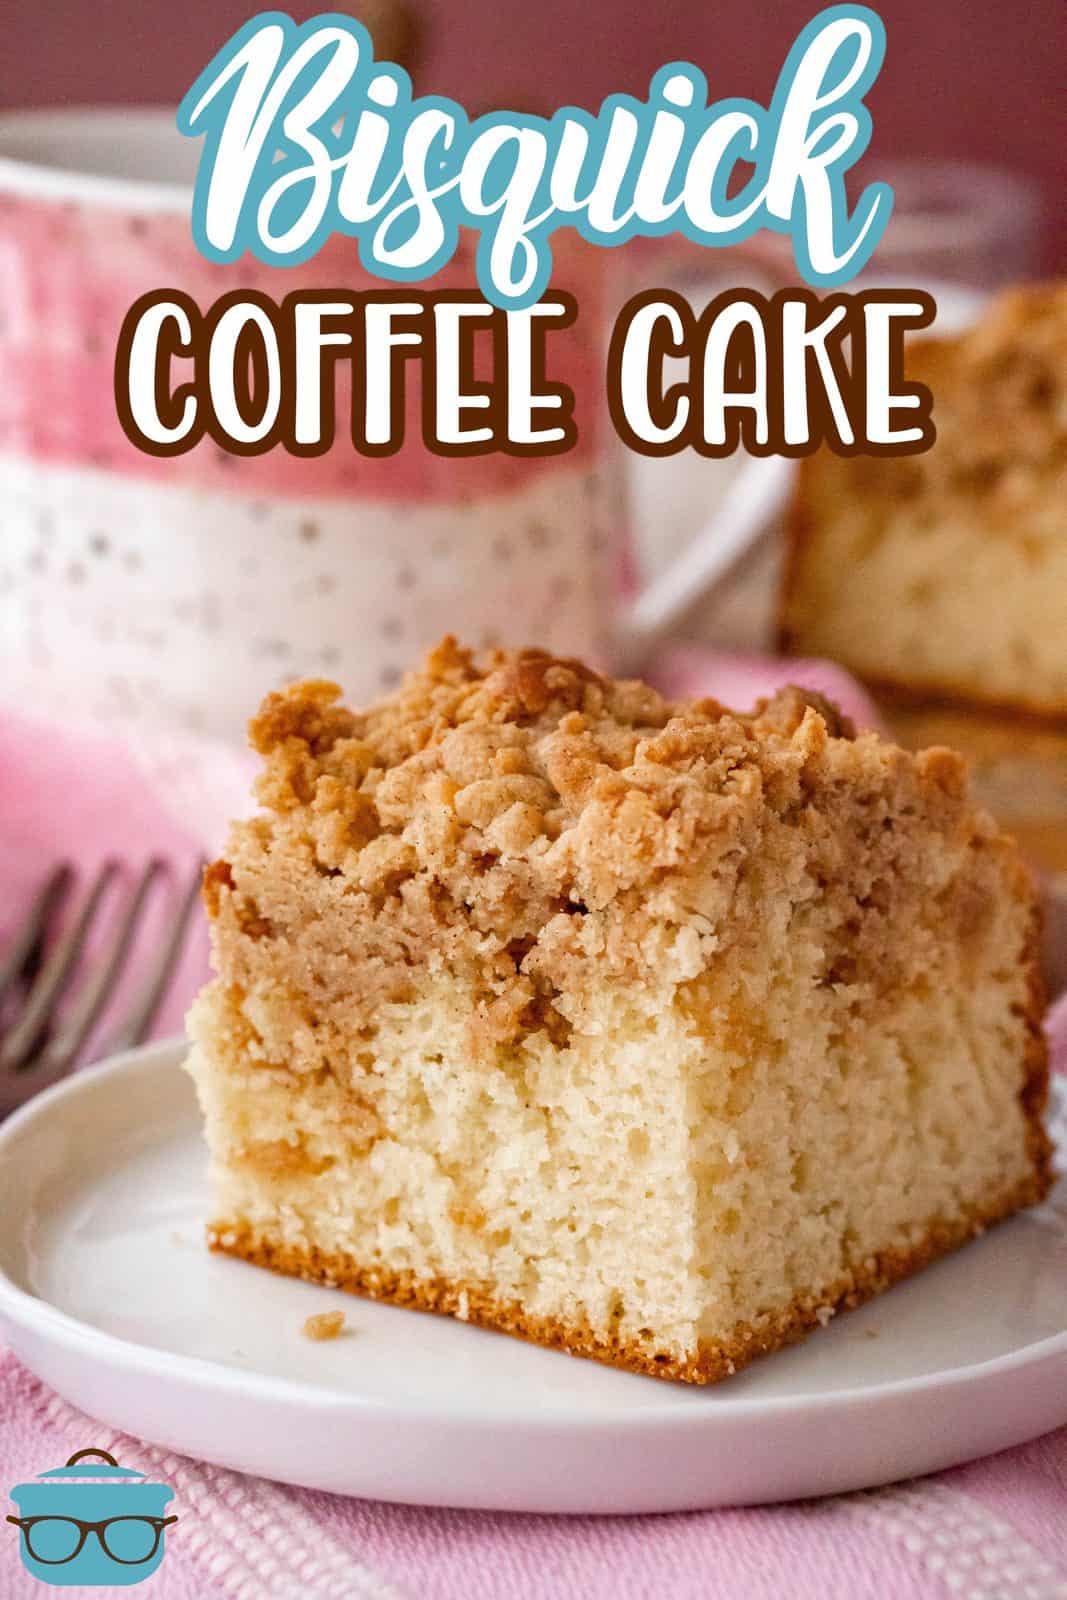 Slice of Bisquick Coffee Cake on white plate Pinterest image.